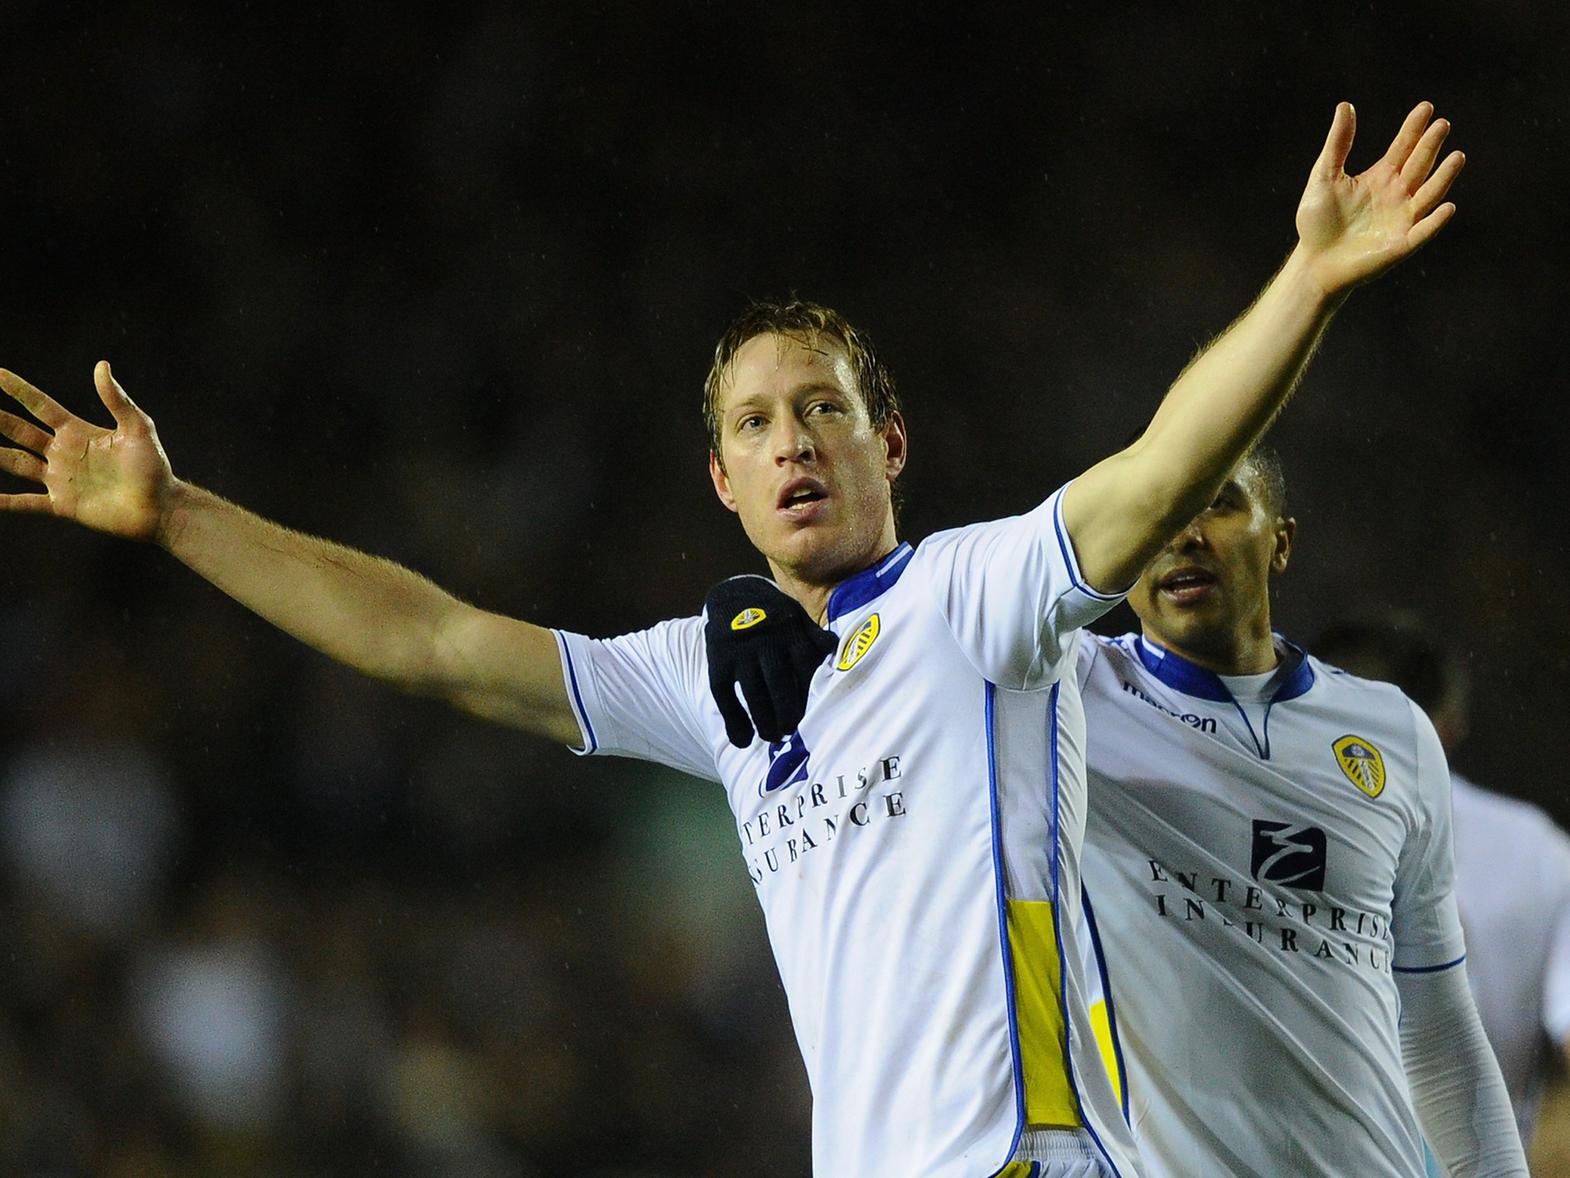 Scored 87 goals in 221 appearances for Leeds in all competitions.